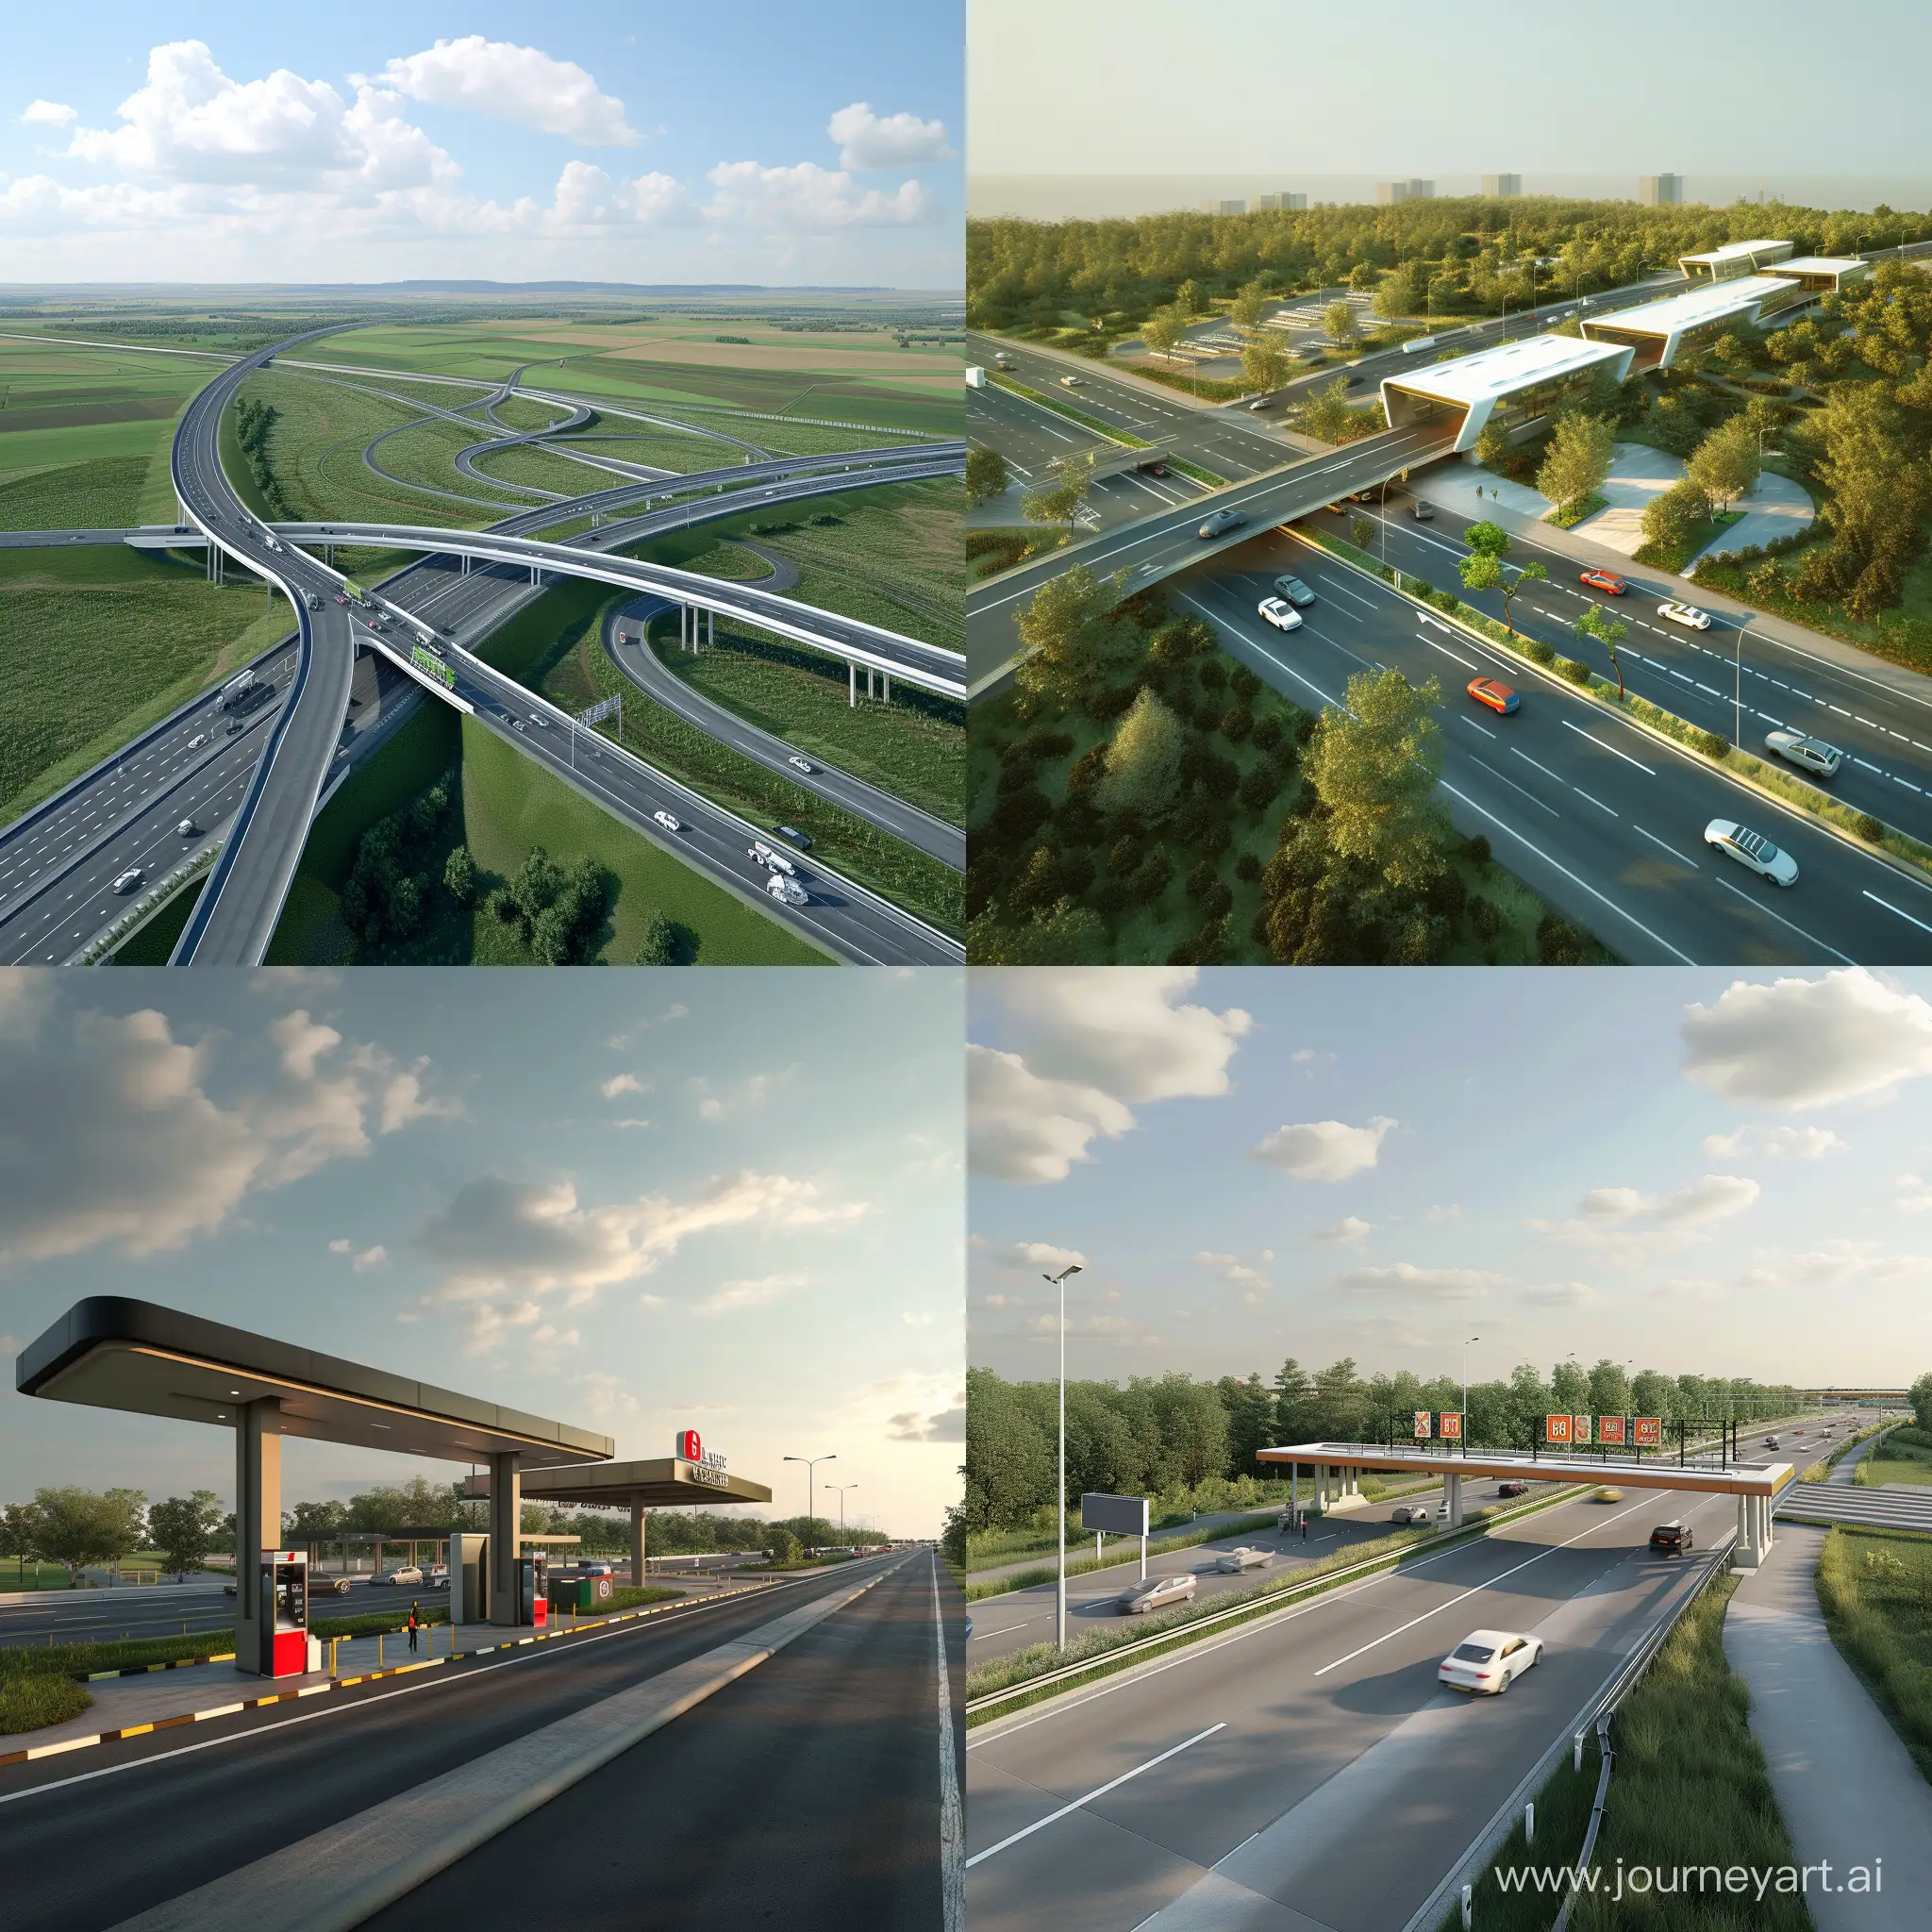 Futuristic-Highway-Service-Area-with-Advanced-Infrastructure